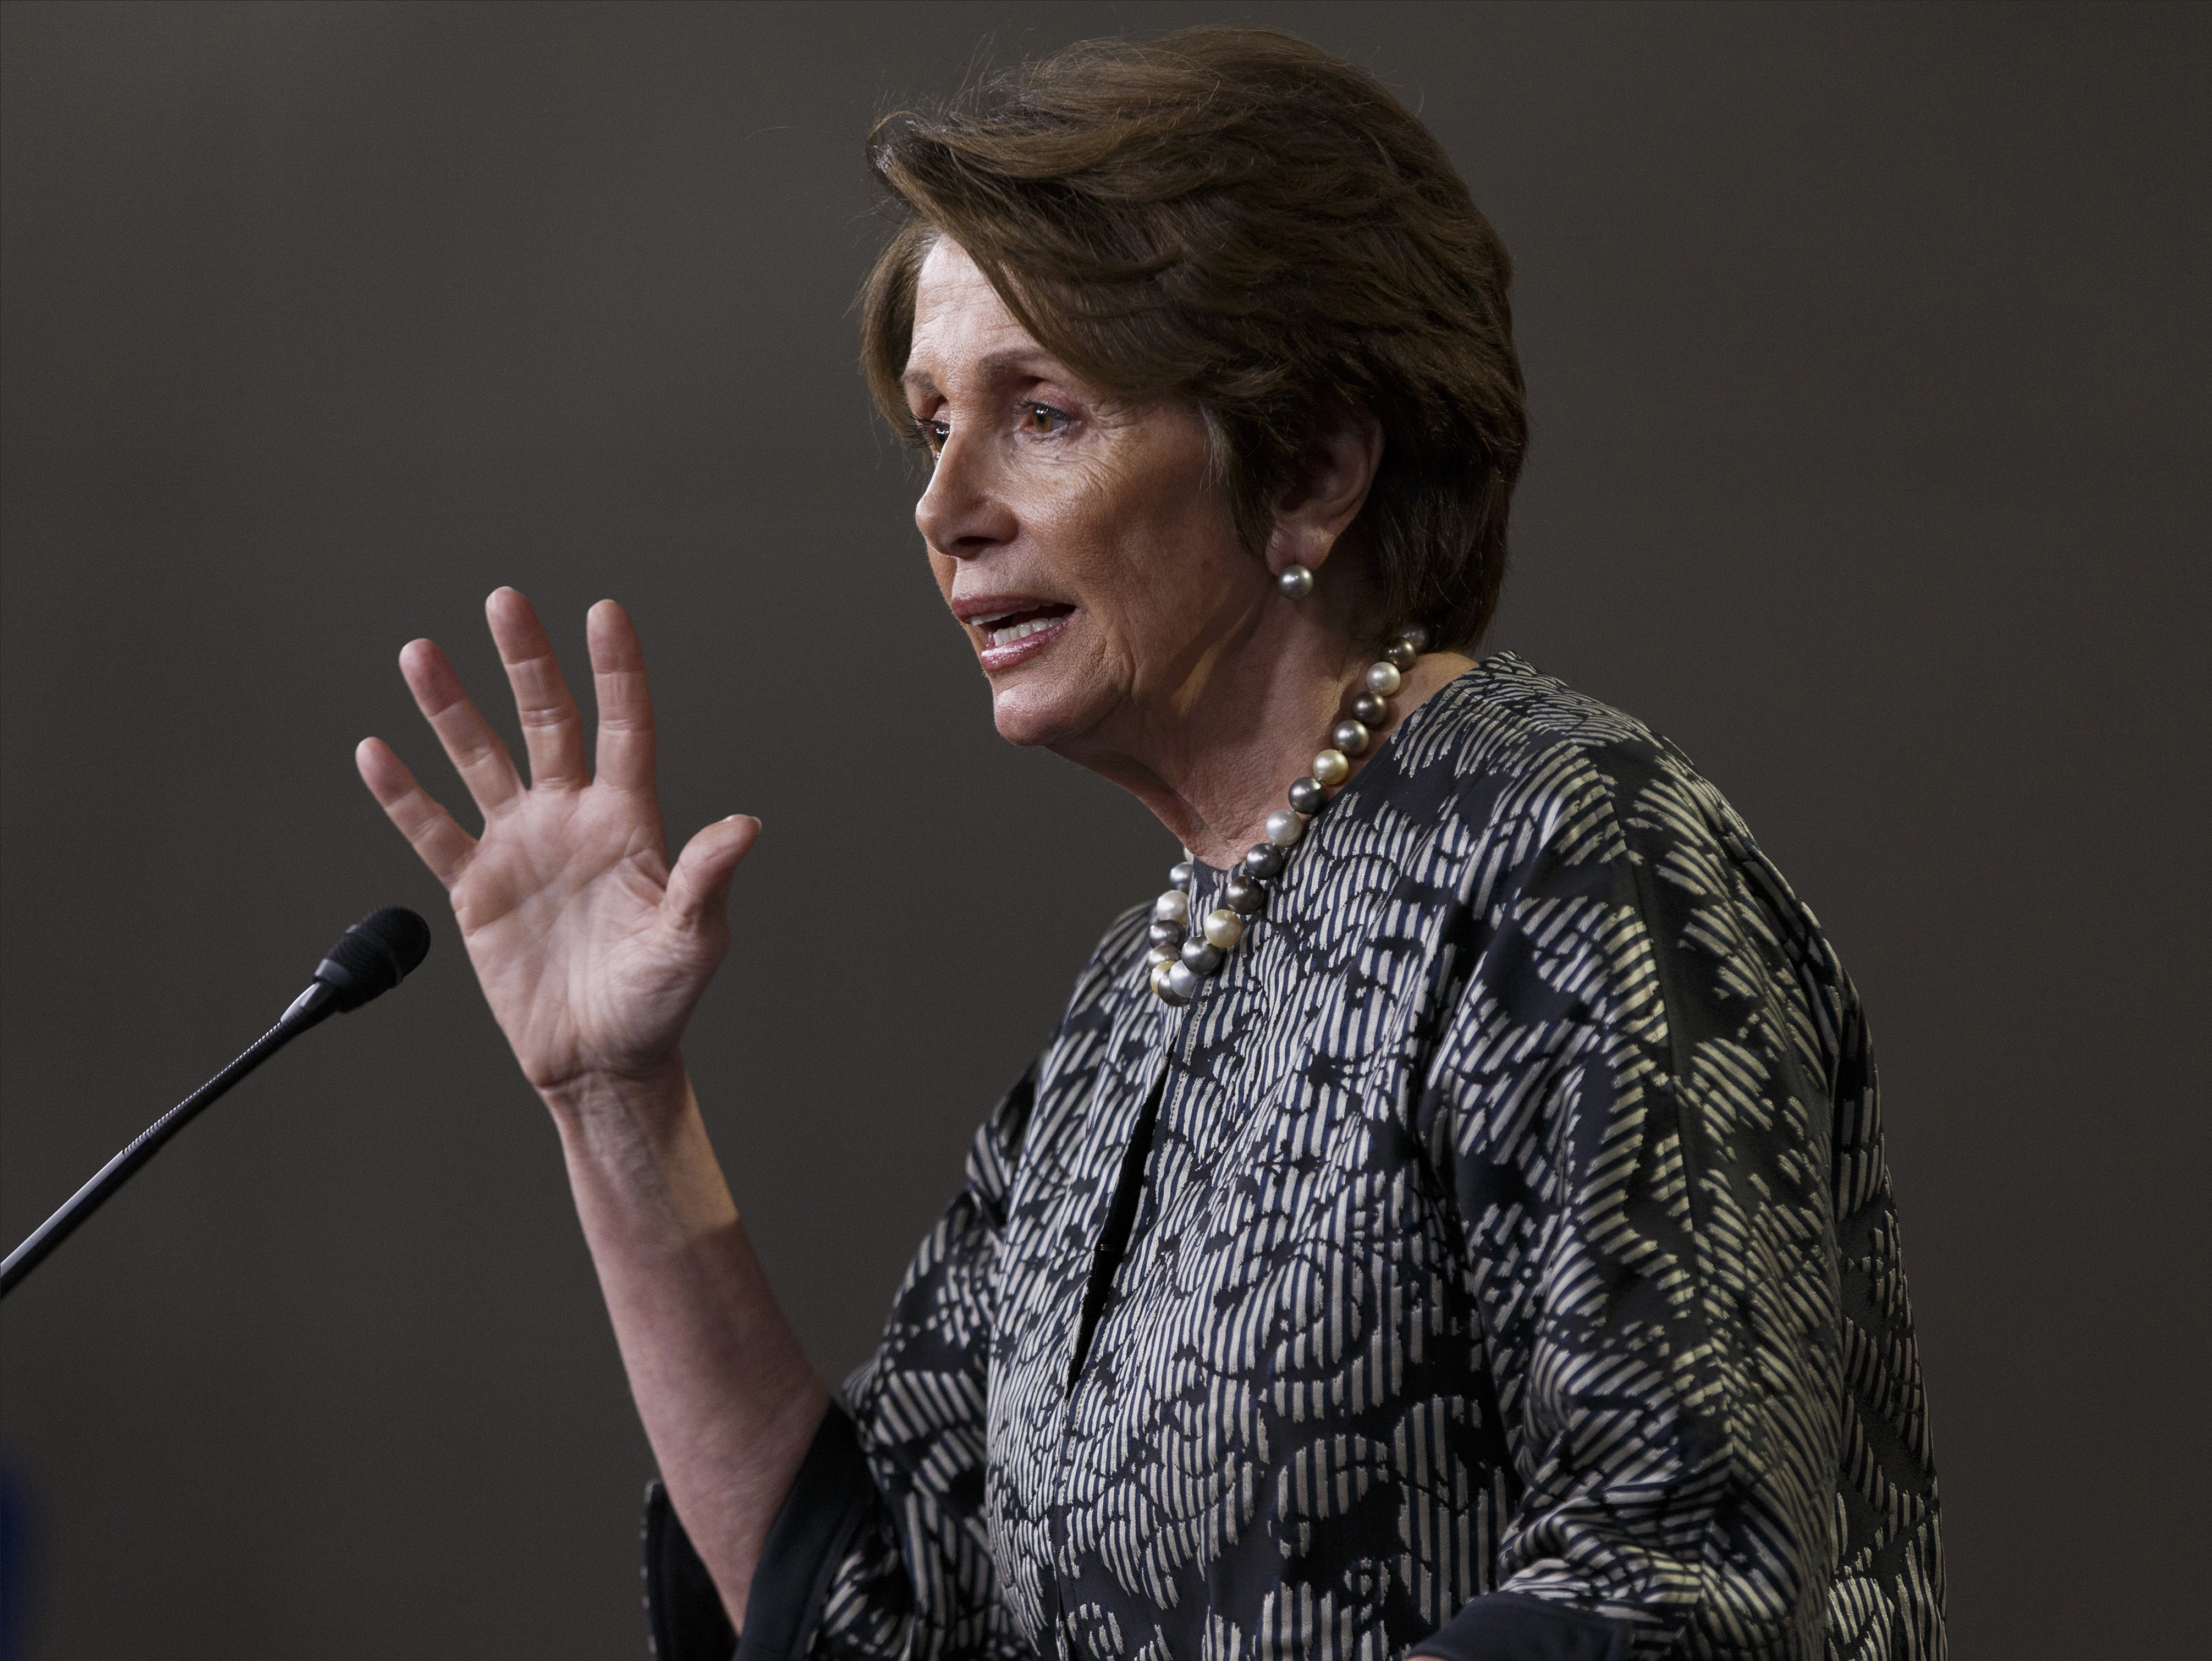 House Minority Leader Nancy Pelosi of Calif. meets with reporters on Capitol Hill in Washington, Thursday, March 13, 2014. (AP Photo/J. Scott Applewhite)